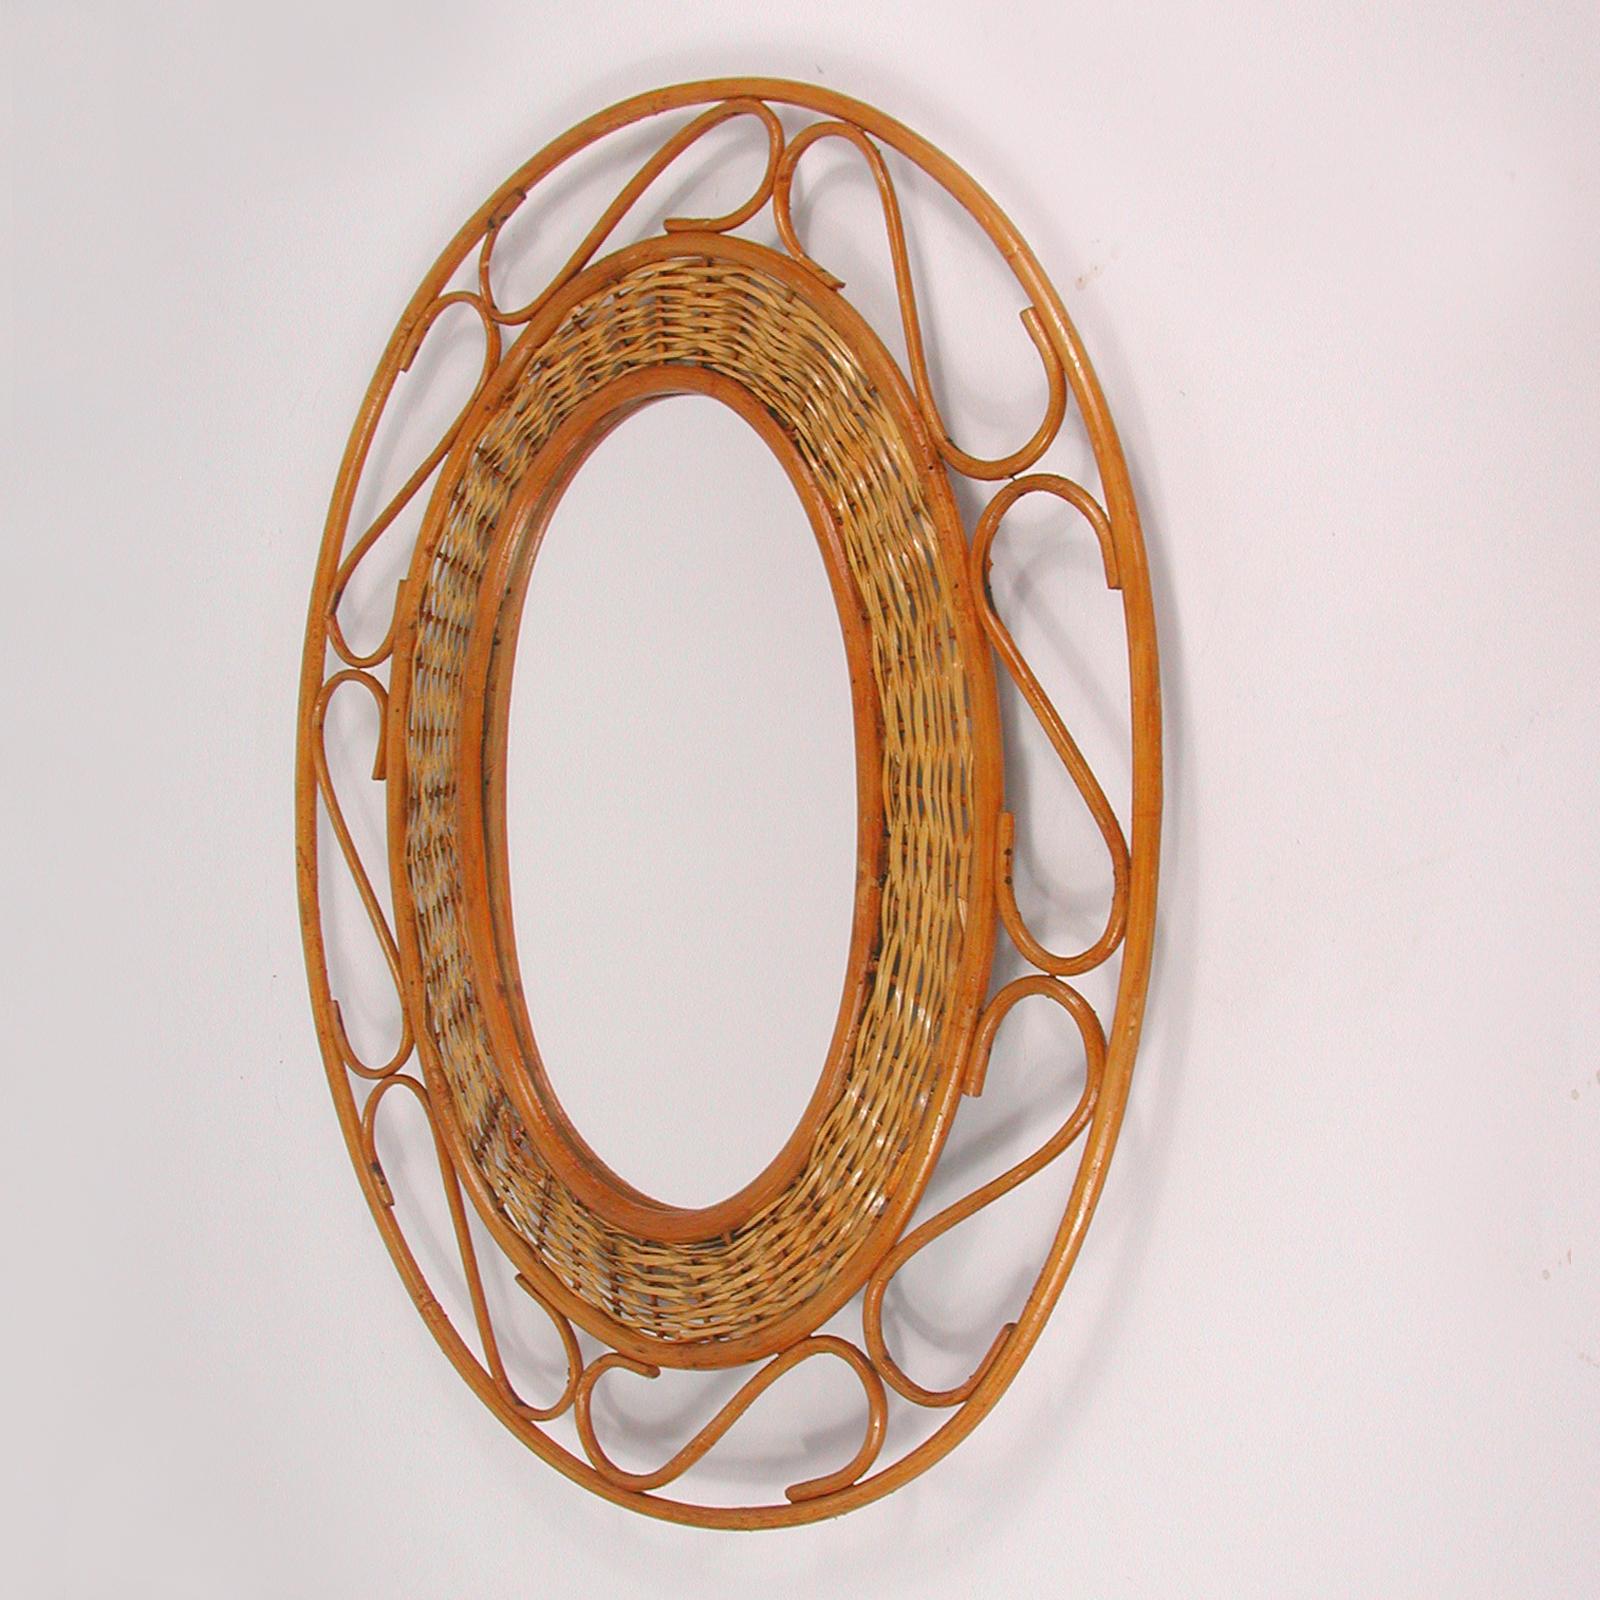 Midcentury Jean Royère Style French Riviera Rattan and Wicker Mirror, 1950s For Sale 4